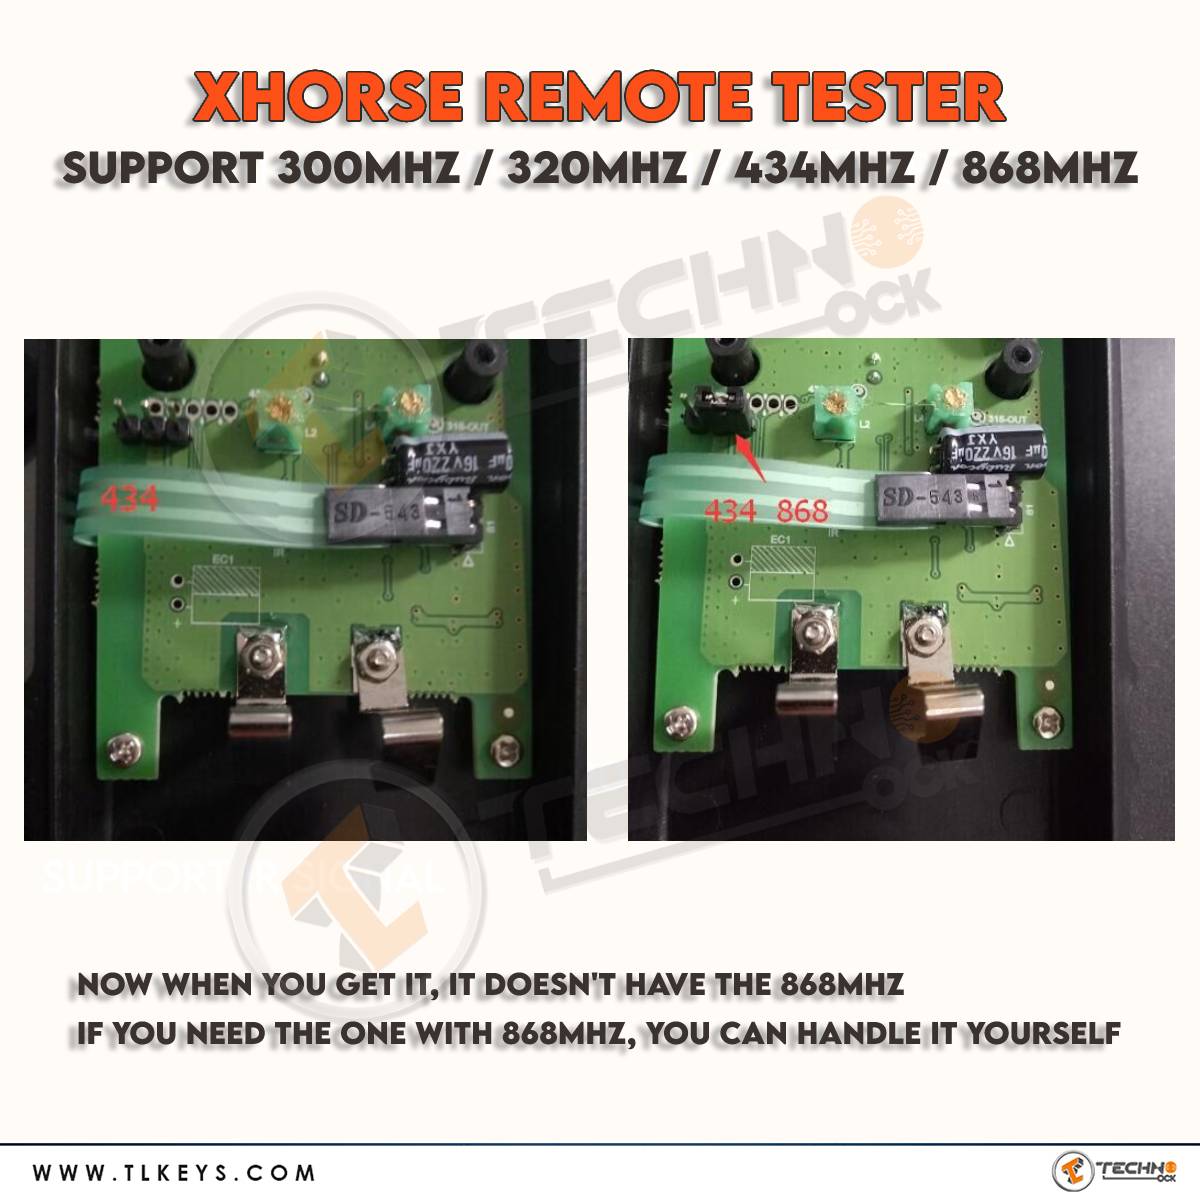 Xhorse Remote Tester doesn't have the 868MHZ